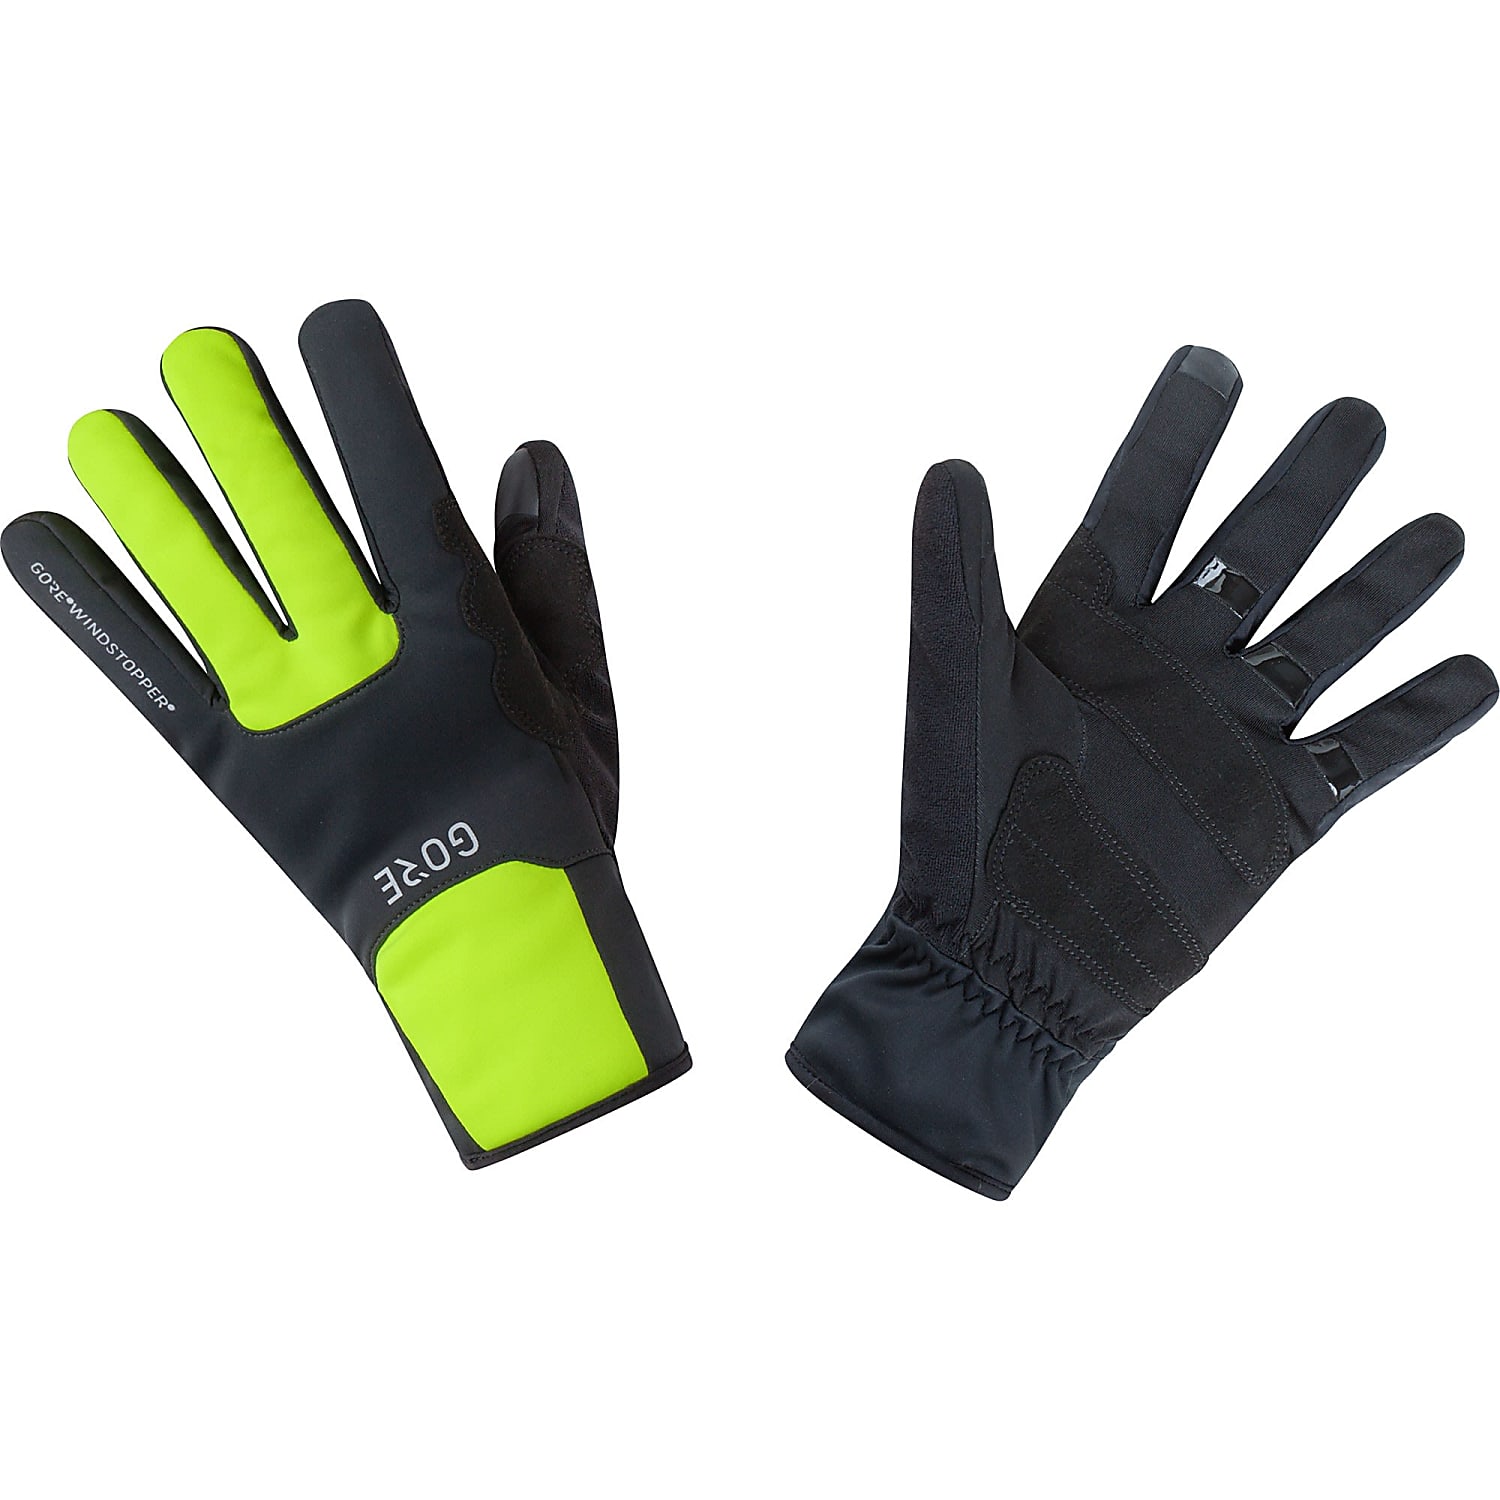 M WINDSTOPPER Thermo Gloves 100310 Colour: Black/Neon Yellow Size: 7 GORE Wear Windproof Gloves